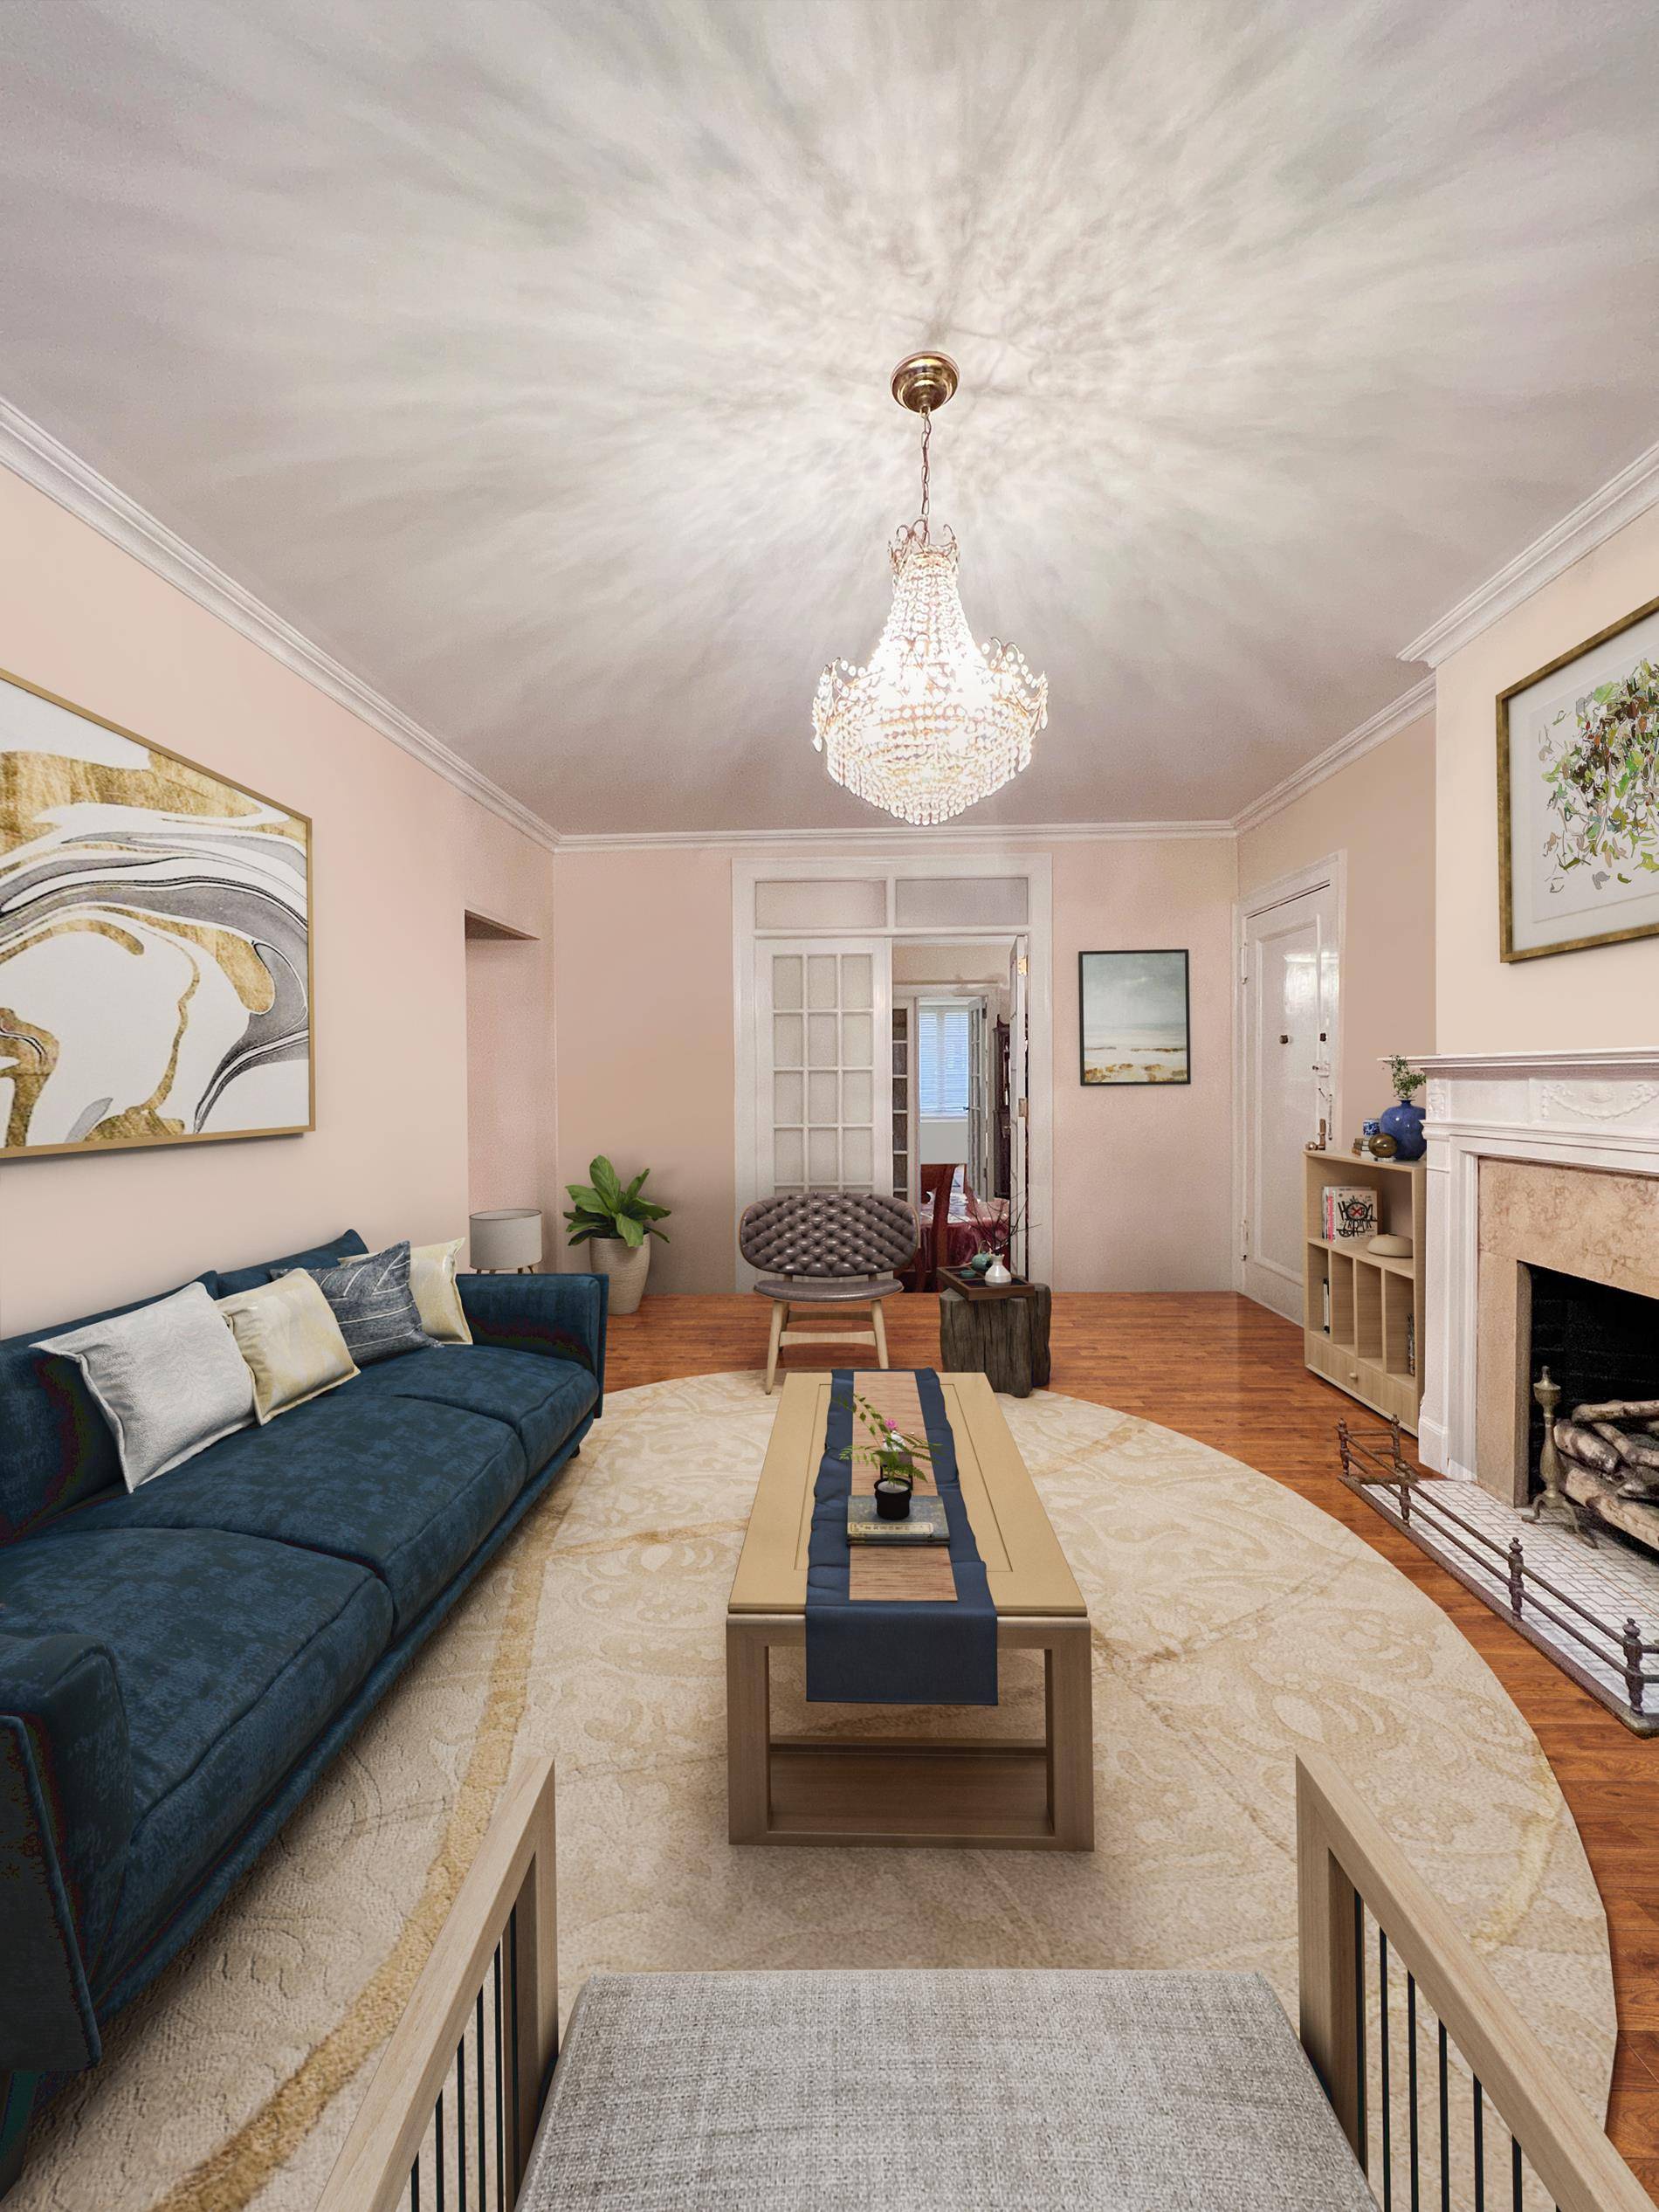 Come fall in love with this sun light FILLED, crown molding surrounded apartment in one of the best locations in historic Jackson Heights.